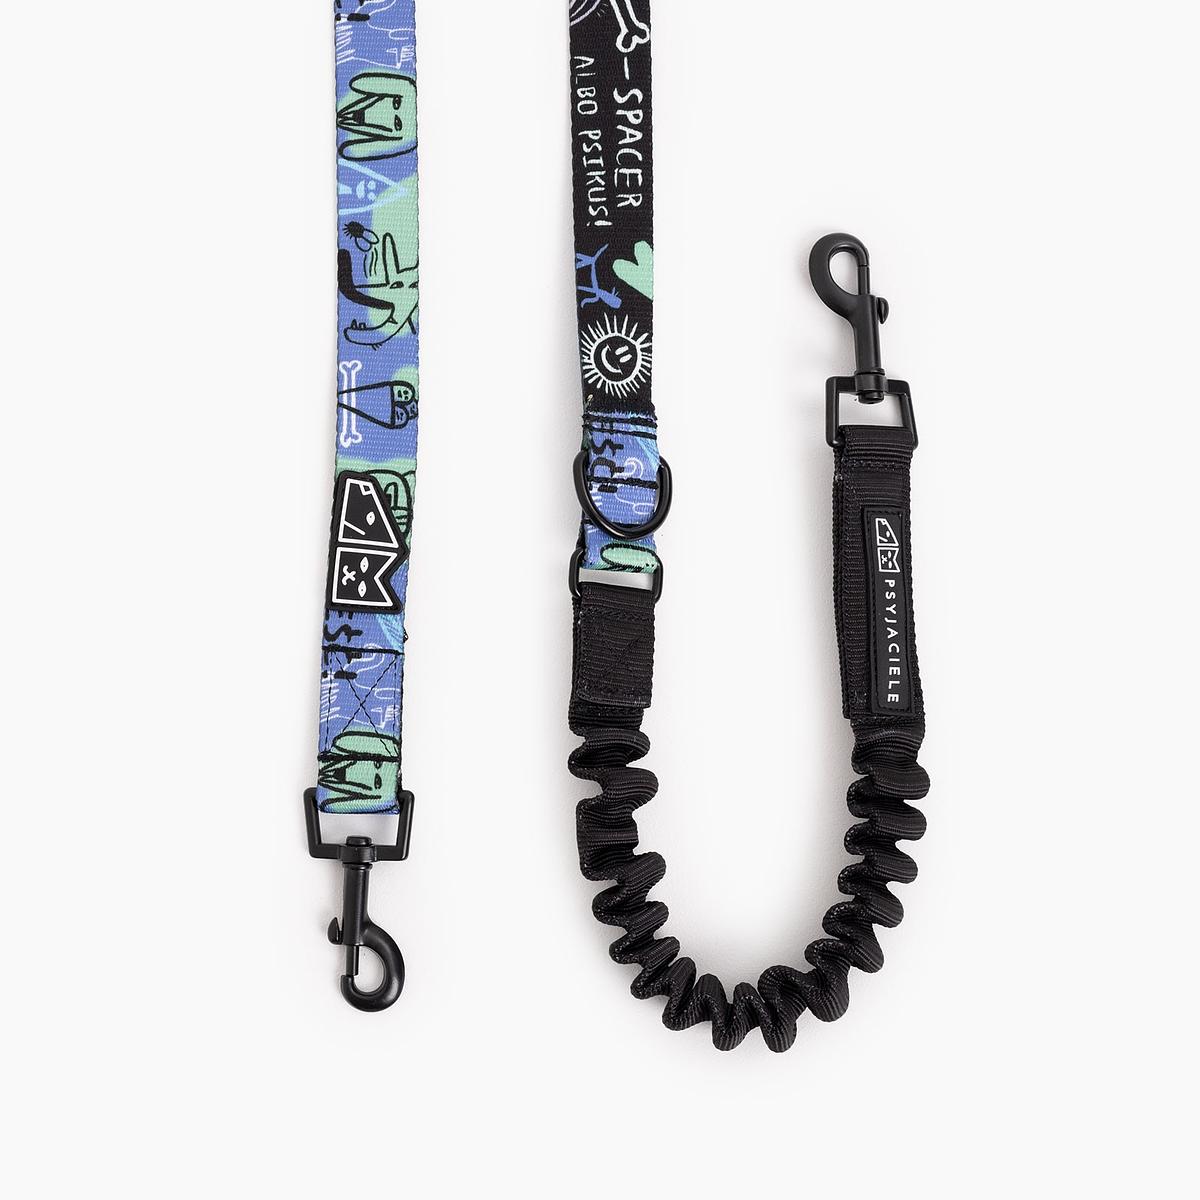 Adjustable leash with shock absorber "Walk or treat" 